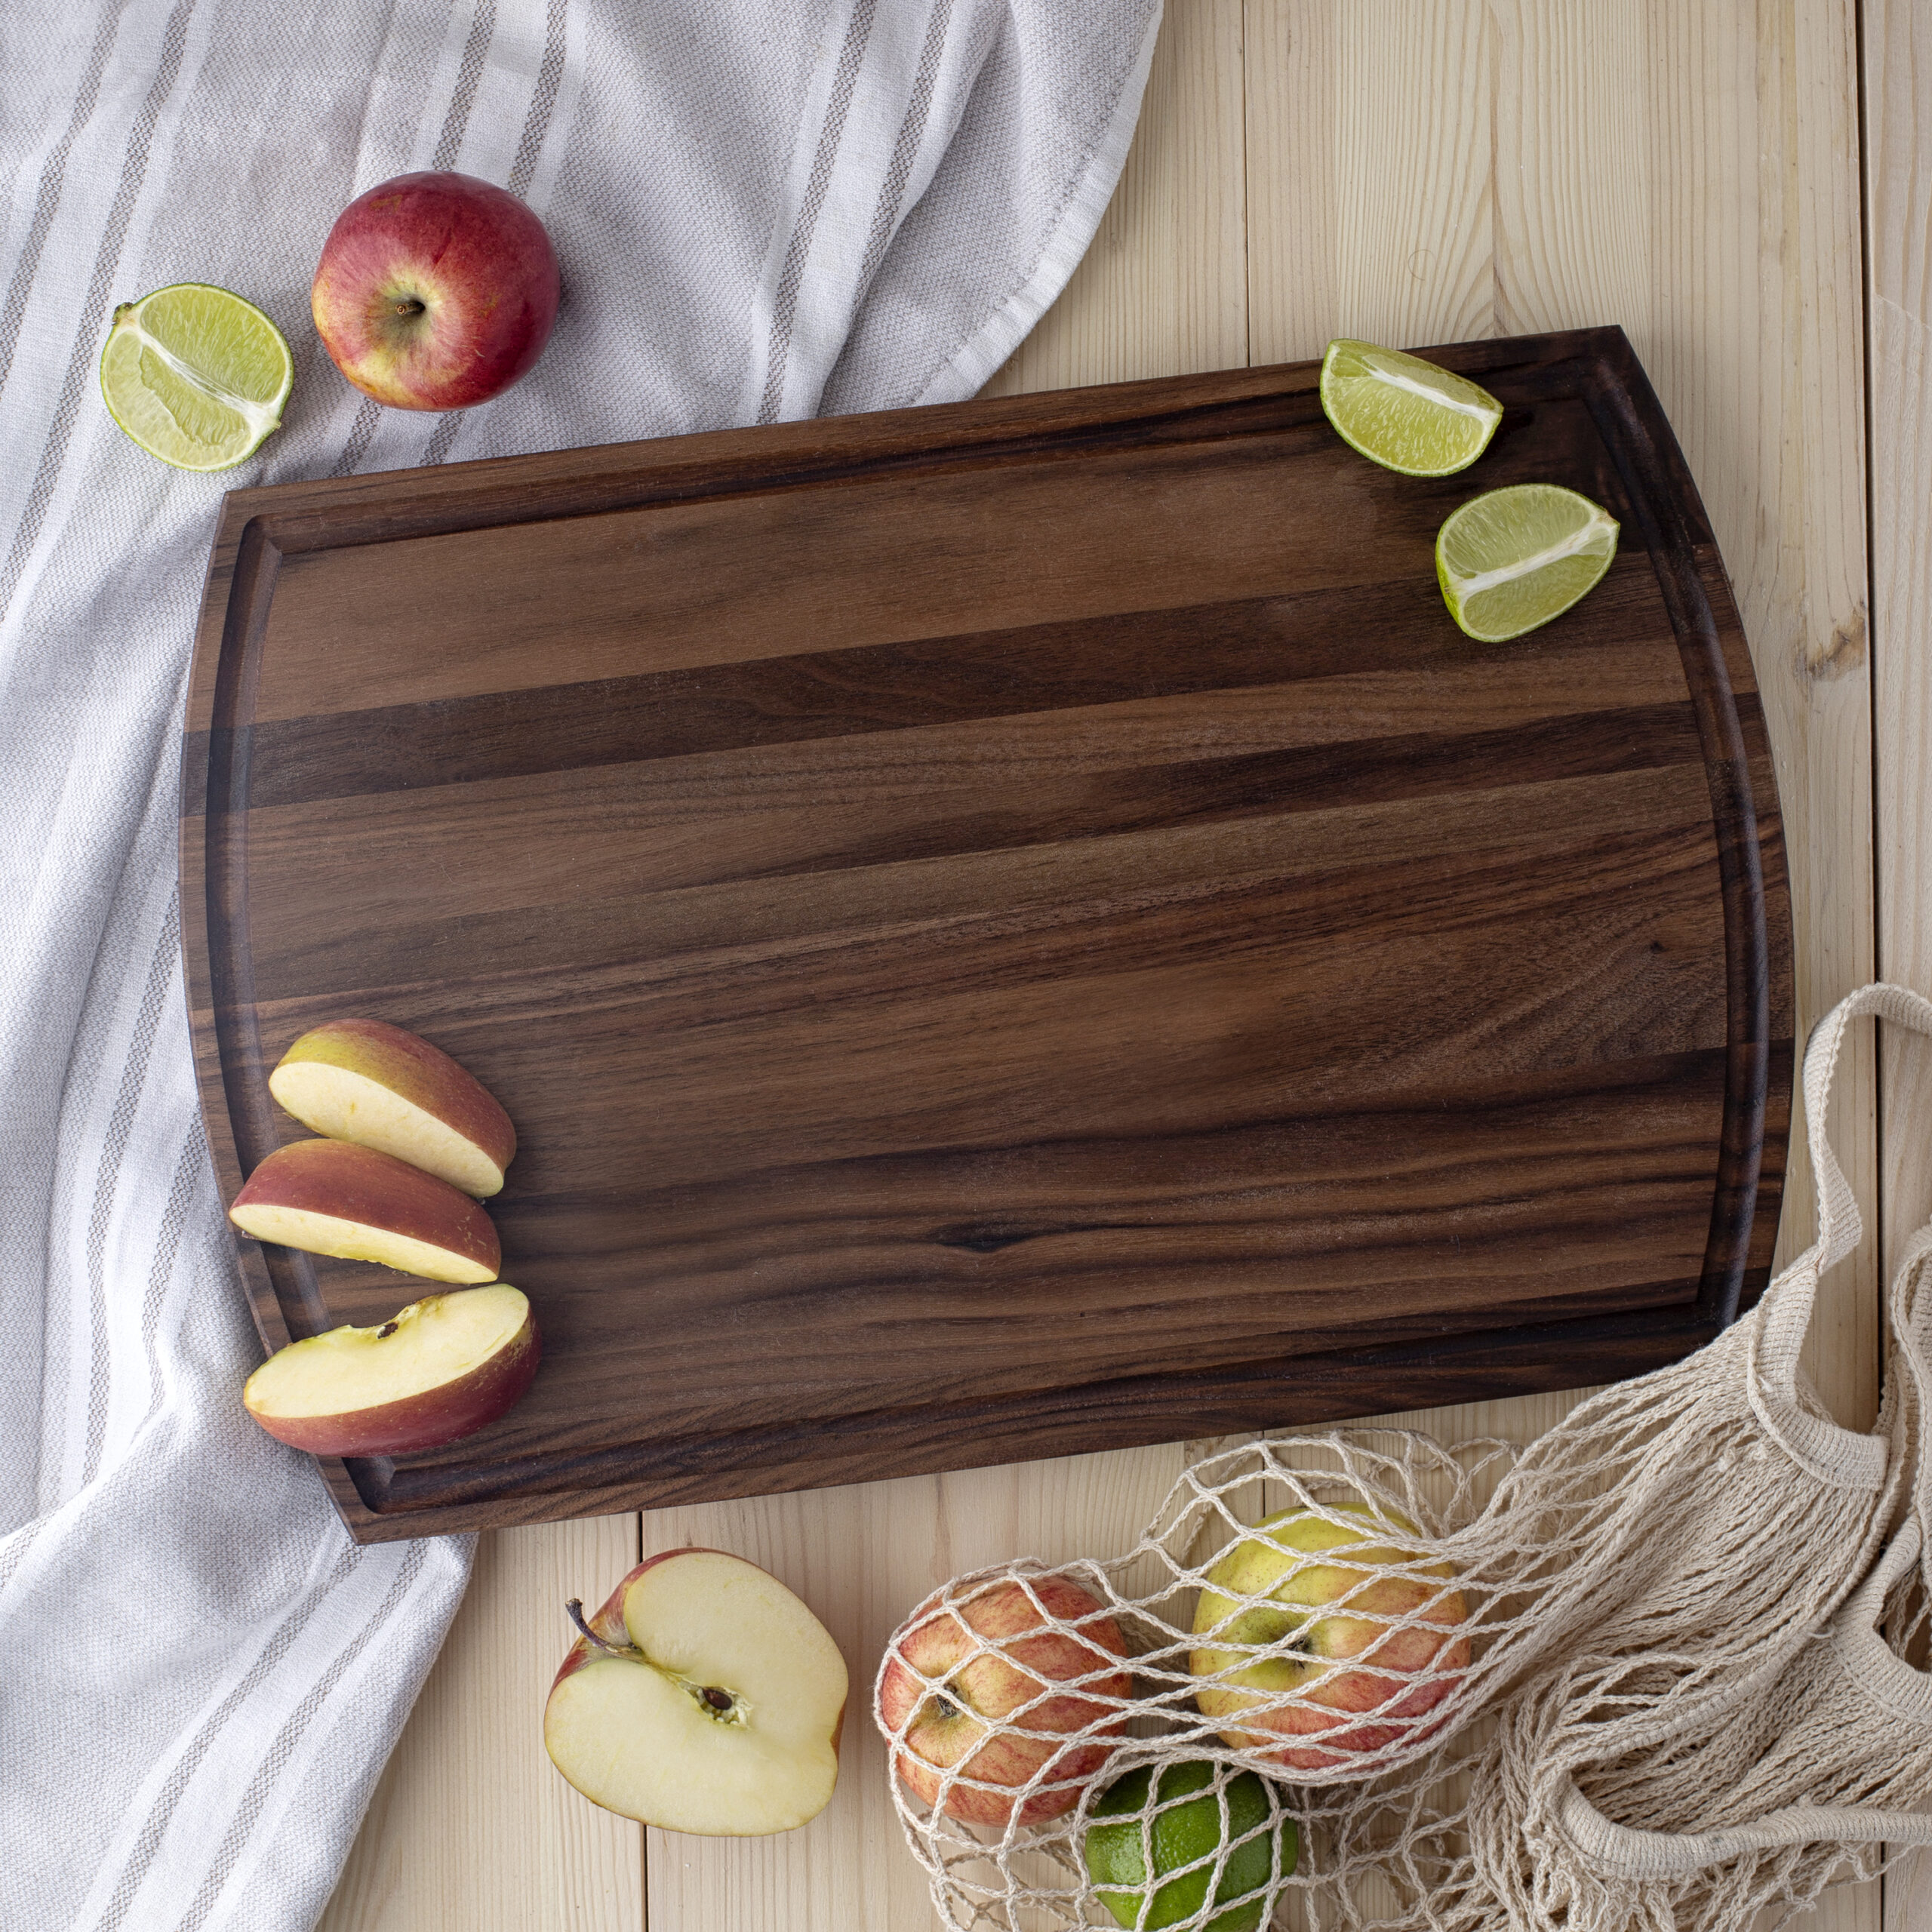 Extra Large Walnut Cutting Board, 24 x 18, With Juice Groove